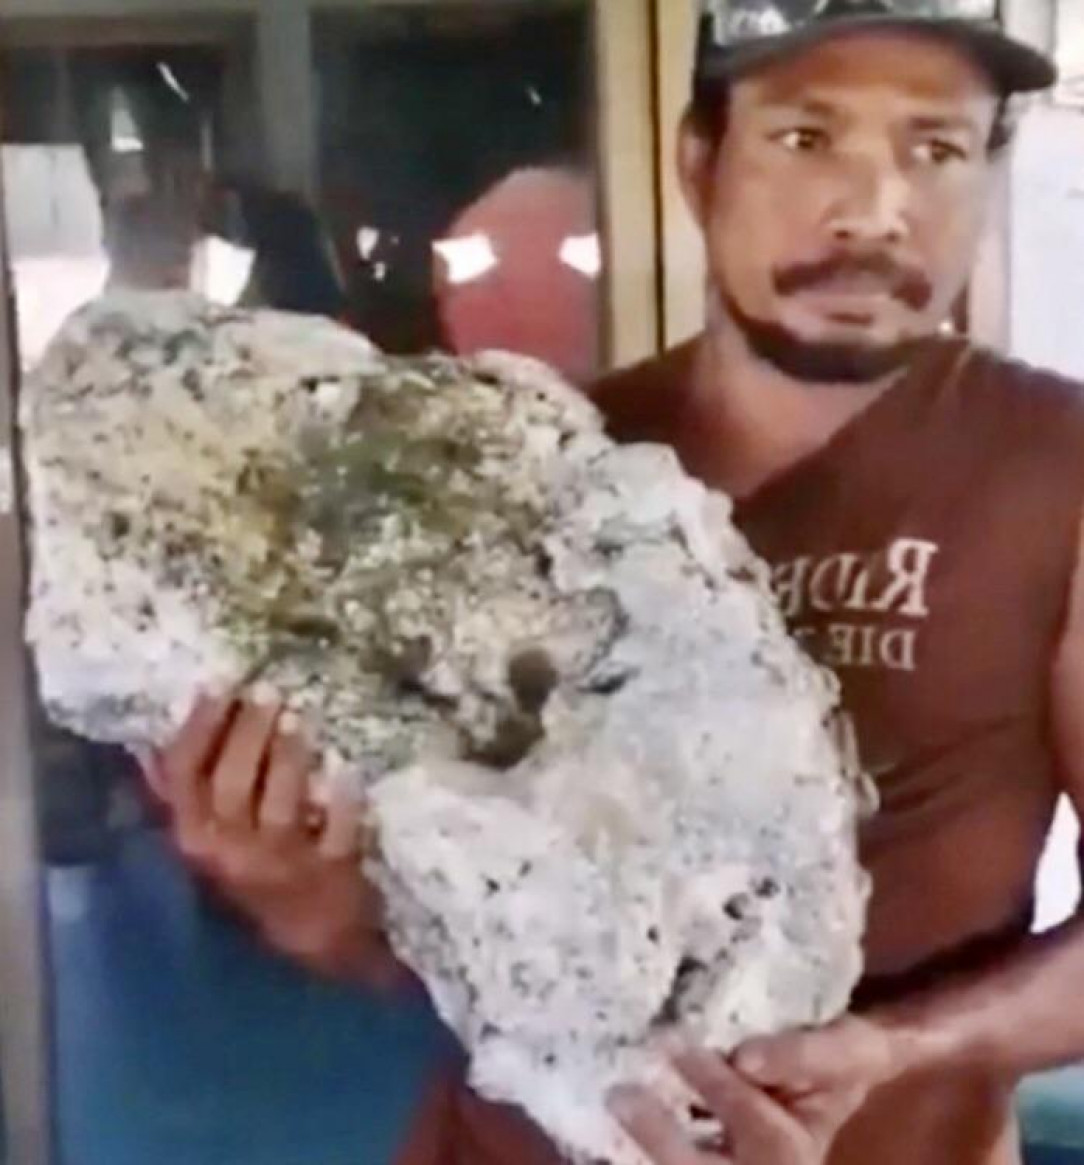 Beach scavenger finds &#039;lump of whale vomit worth £500, 000&#039; while looking for recyclable waste on a Thai beach